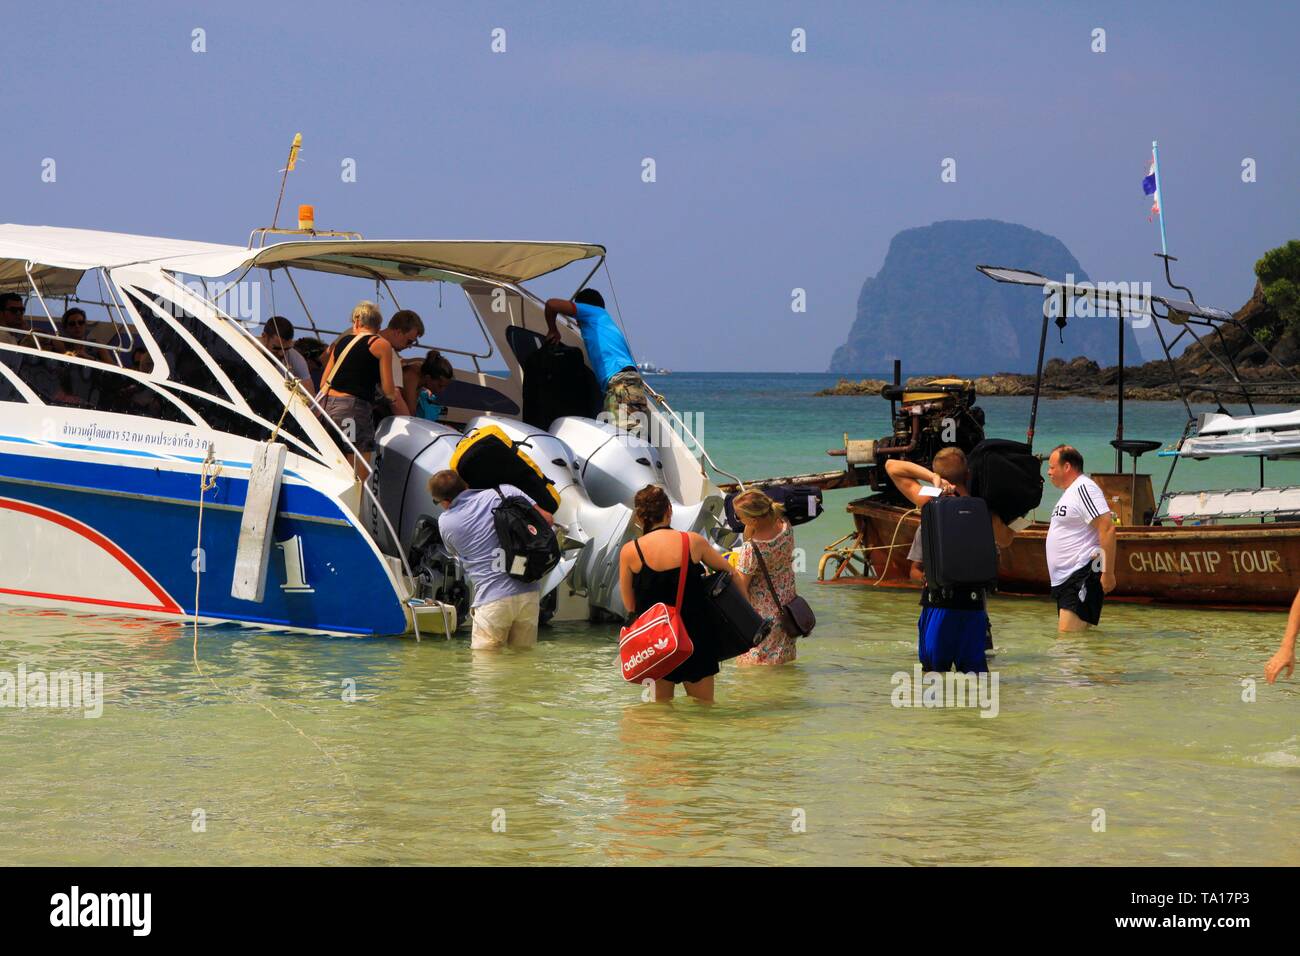 KO MOK, THAILAND (ANDAMAN SEA) - DECEMBER 28. 2013: Island hopping in  Andaman sea - Tourists enter speed boat over outboard motor on tropical  island Stock Photo - Alamy